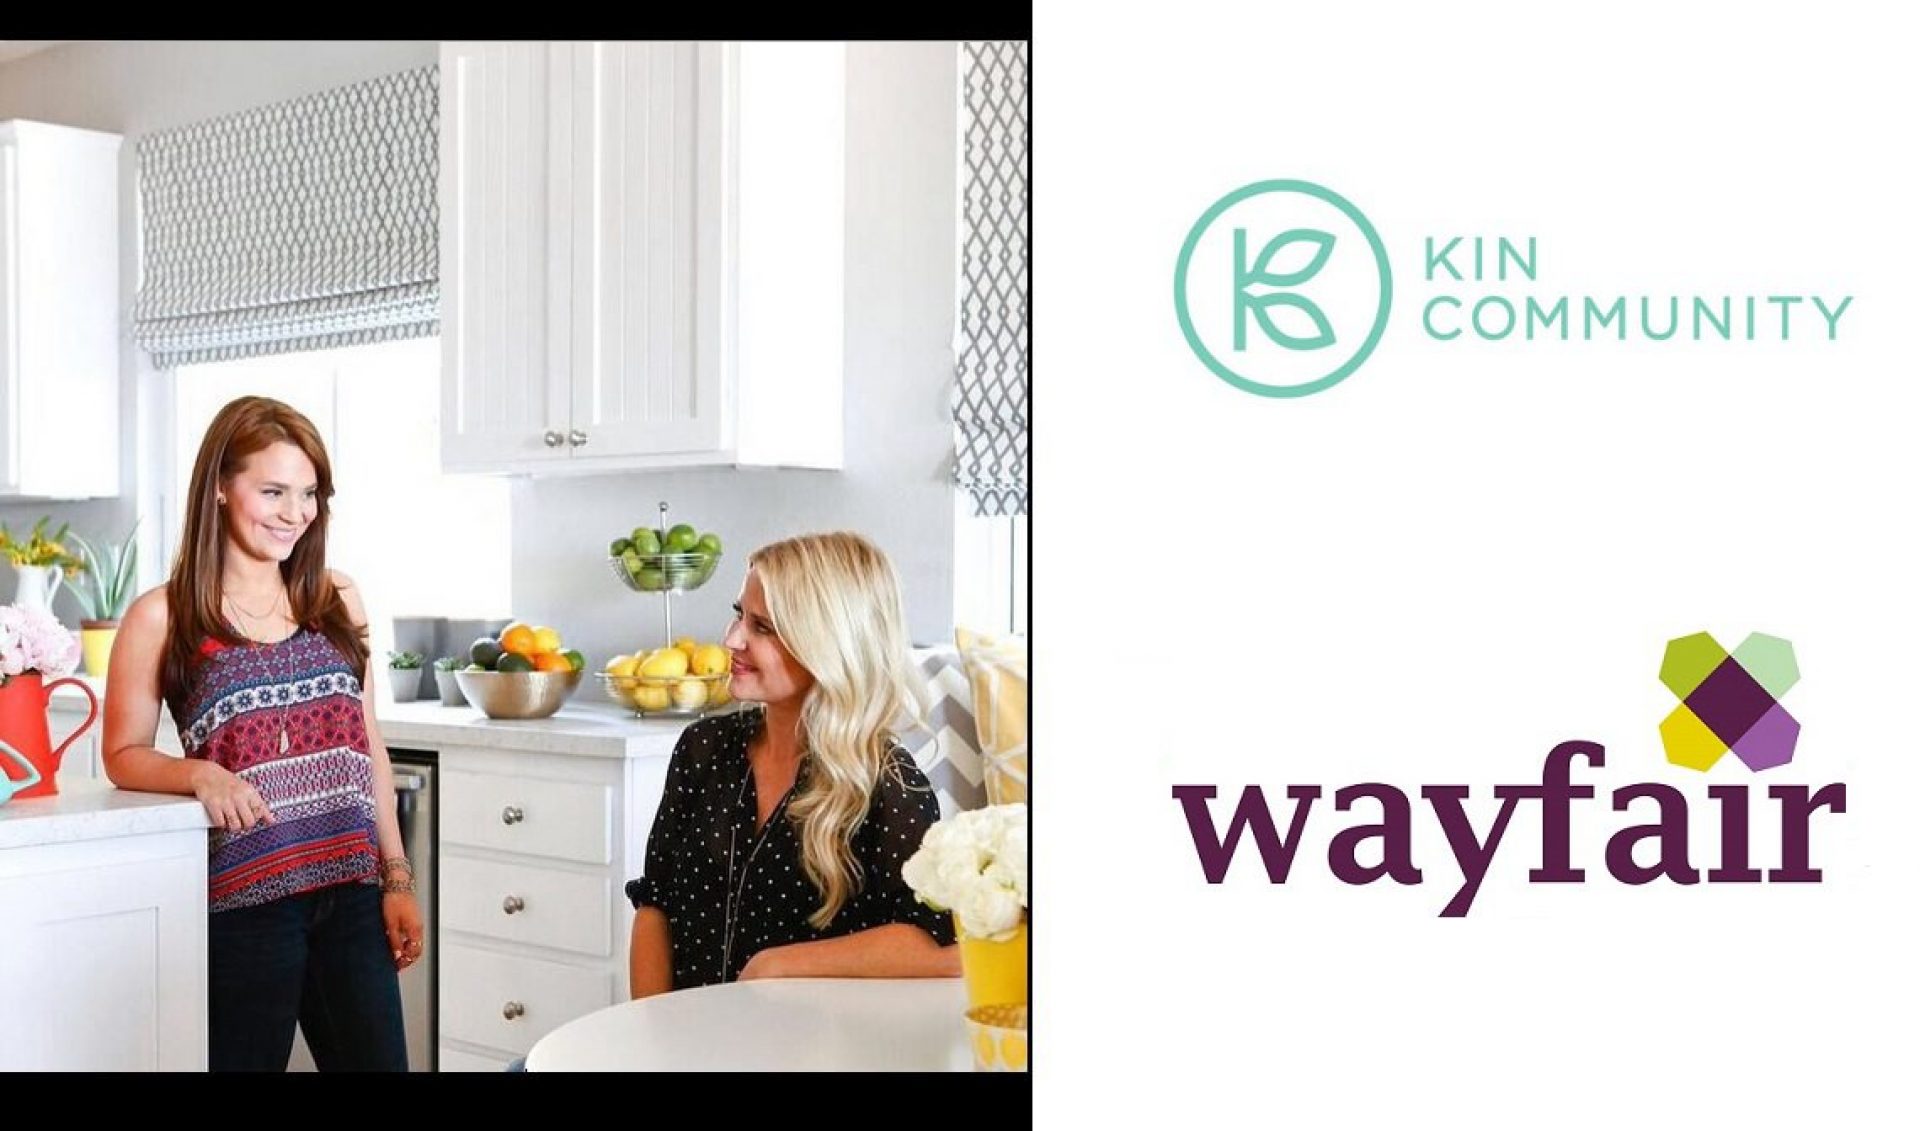 Wayfair, Kin Community To Debut Home Makeover Show, Starting With Rosanna Pansino